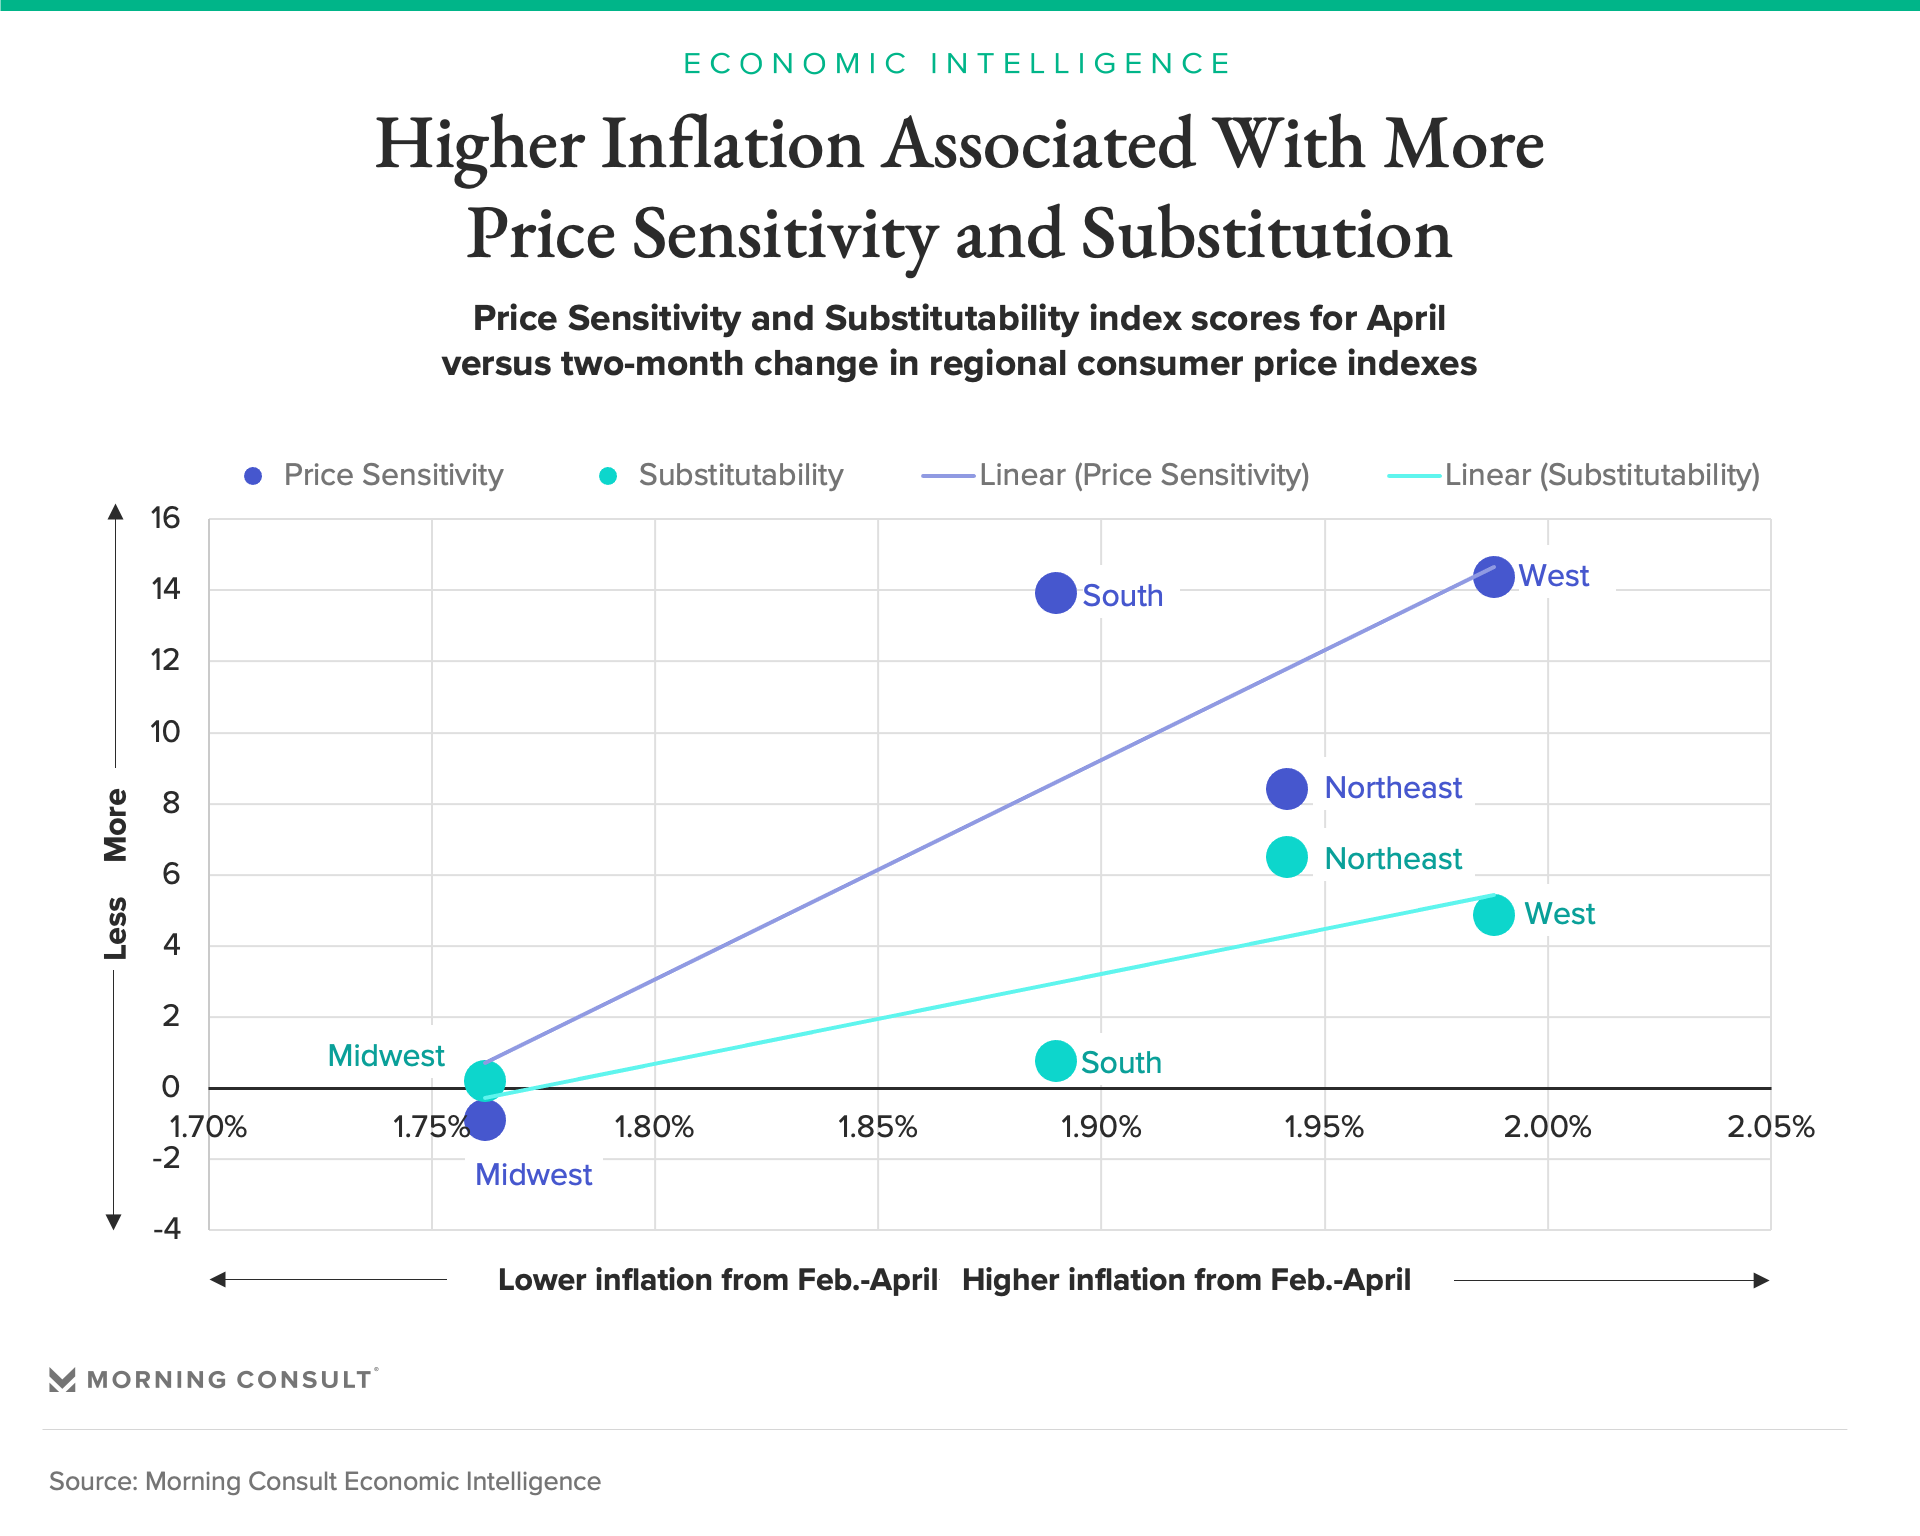 Chart conveying higher inflation associated with price sensitivity and substitution